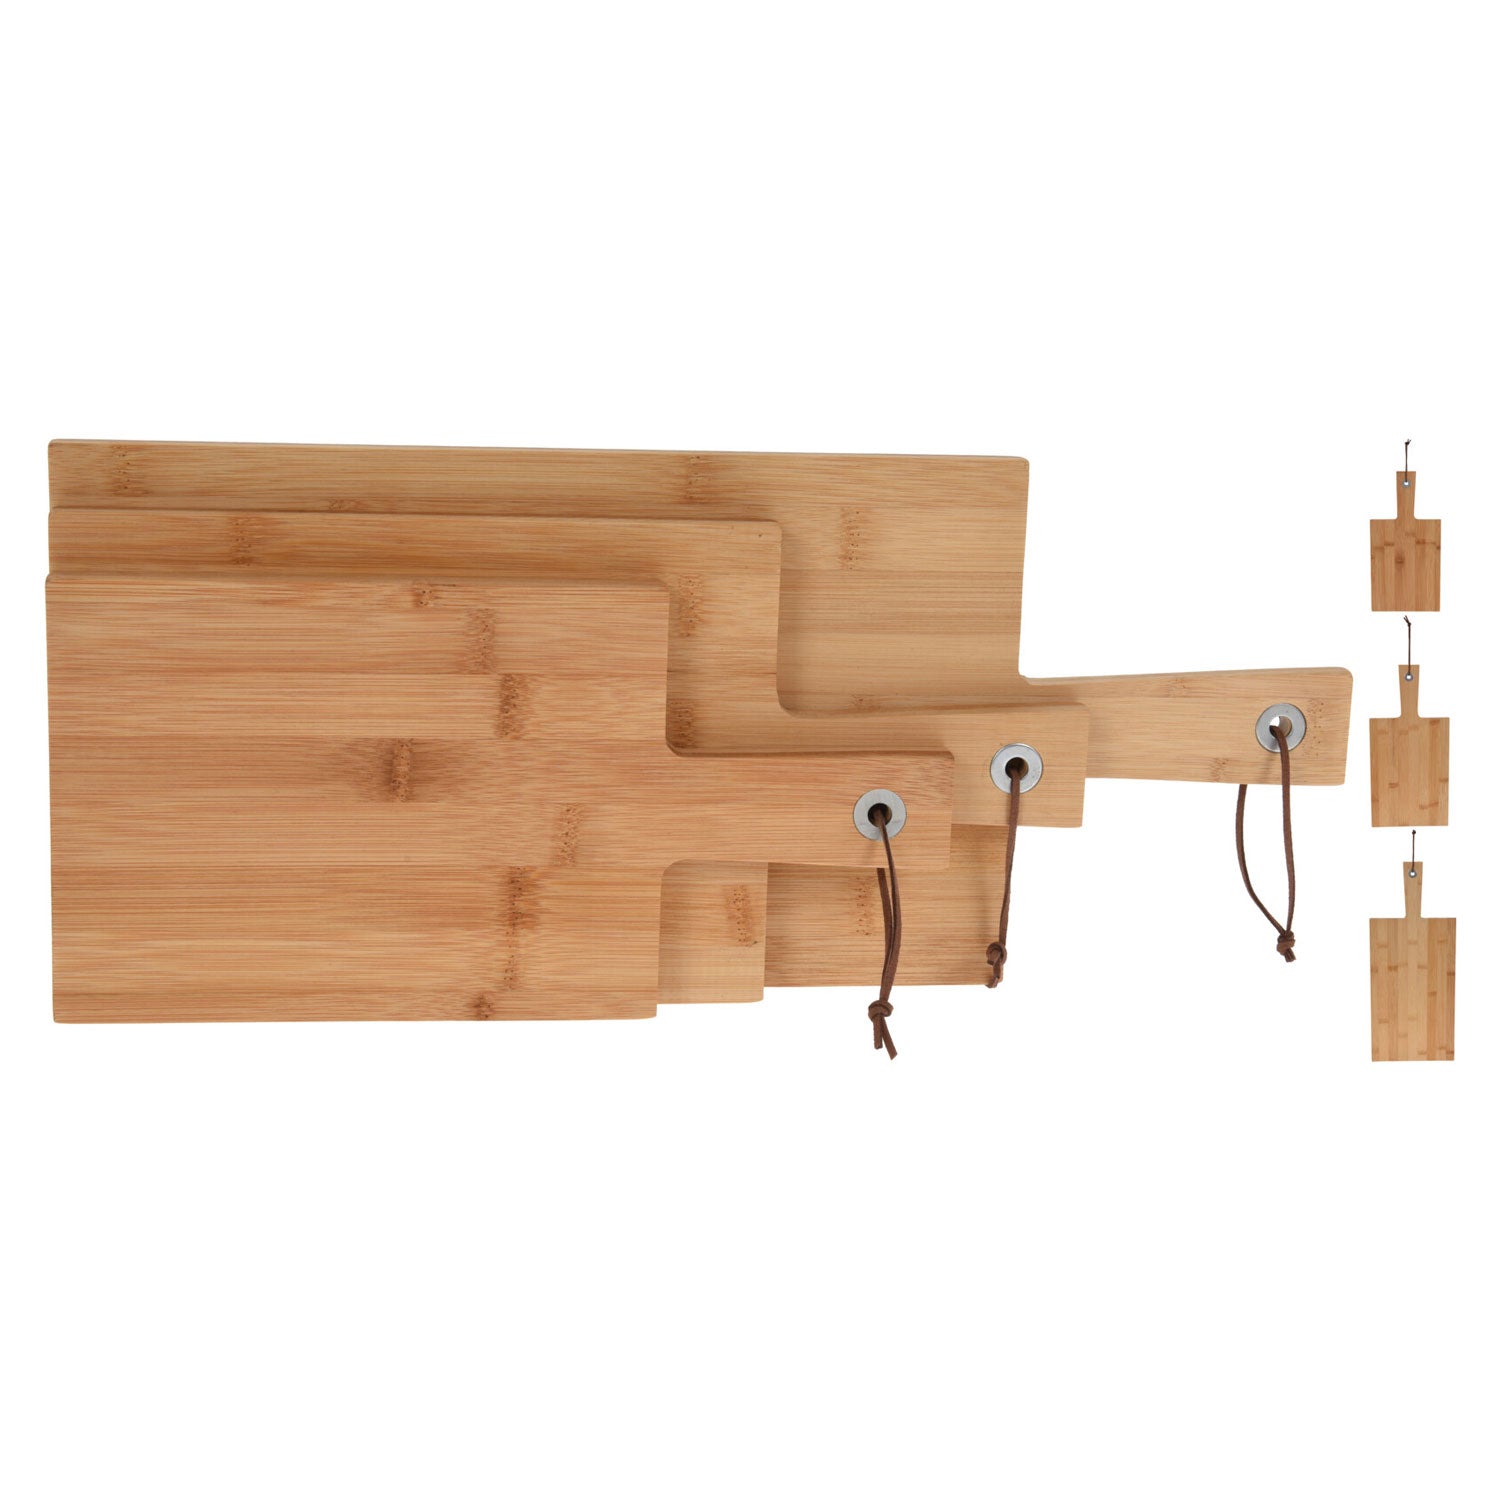 The Home Kitchen Chopping Board Bamboo 3 Piece Set 1 Shaws Department Stores